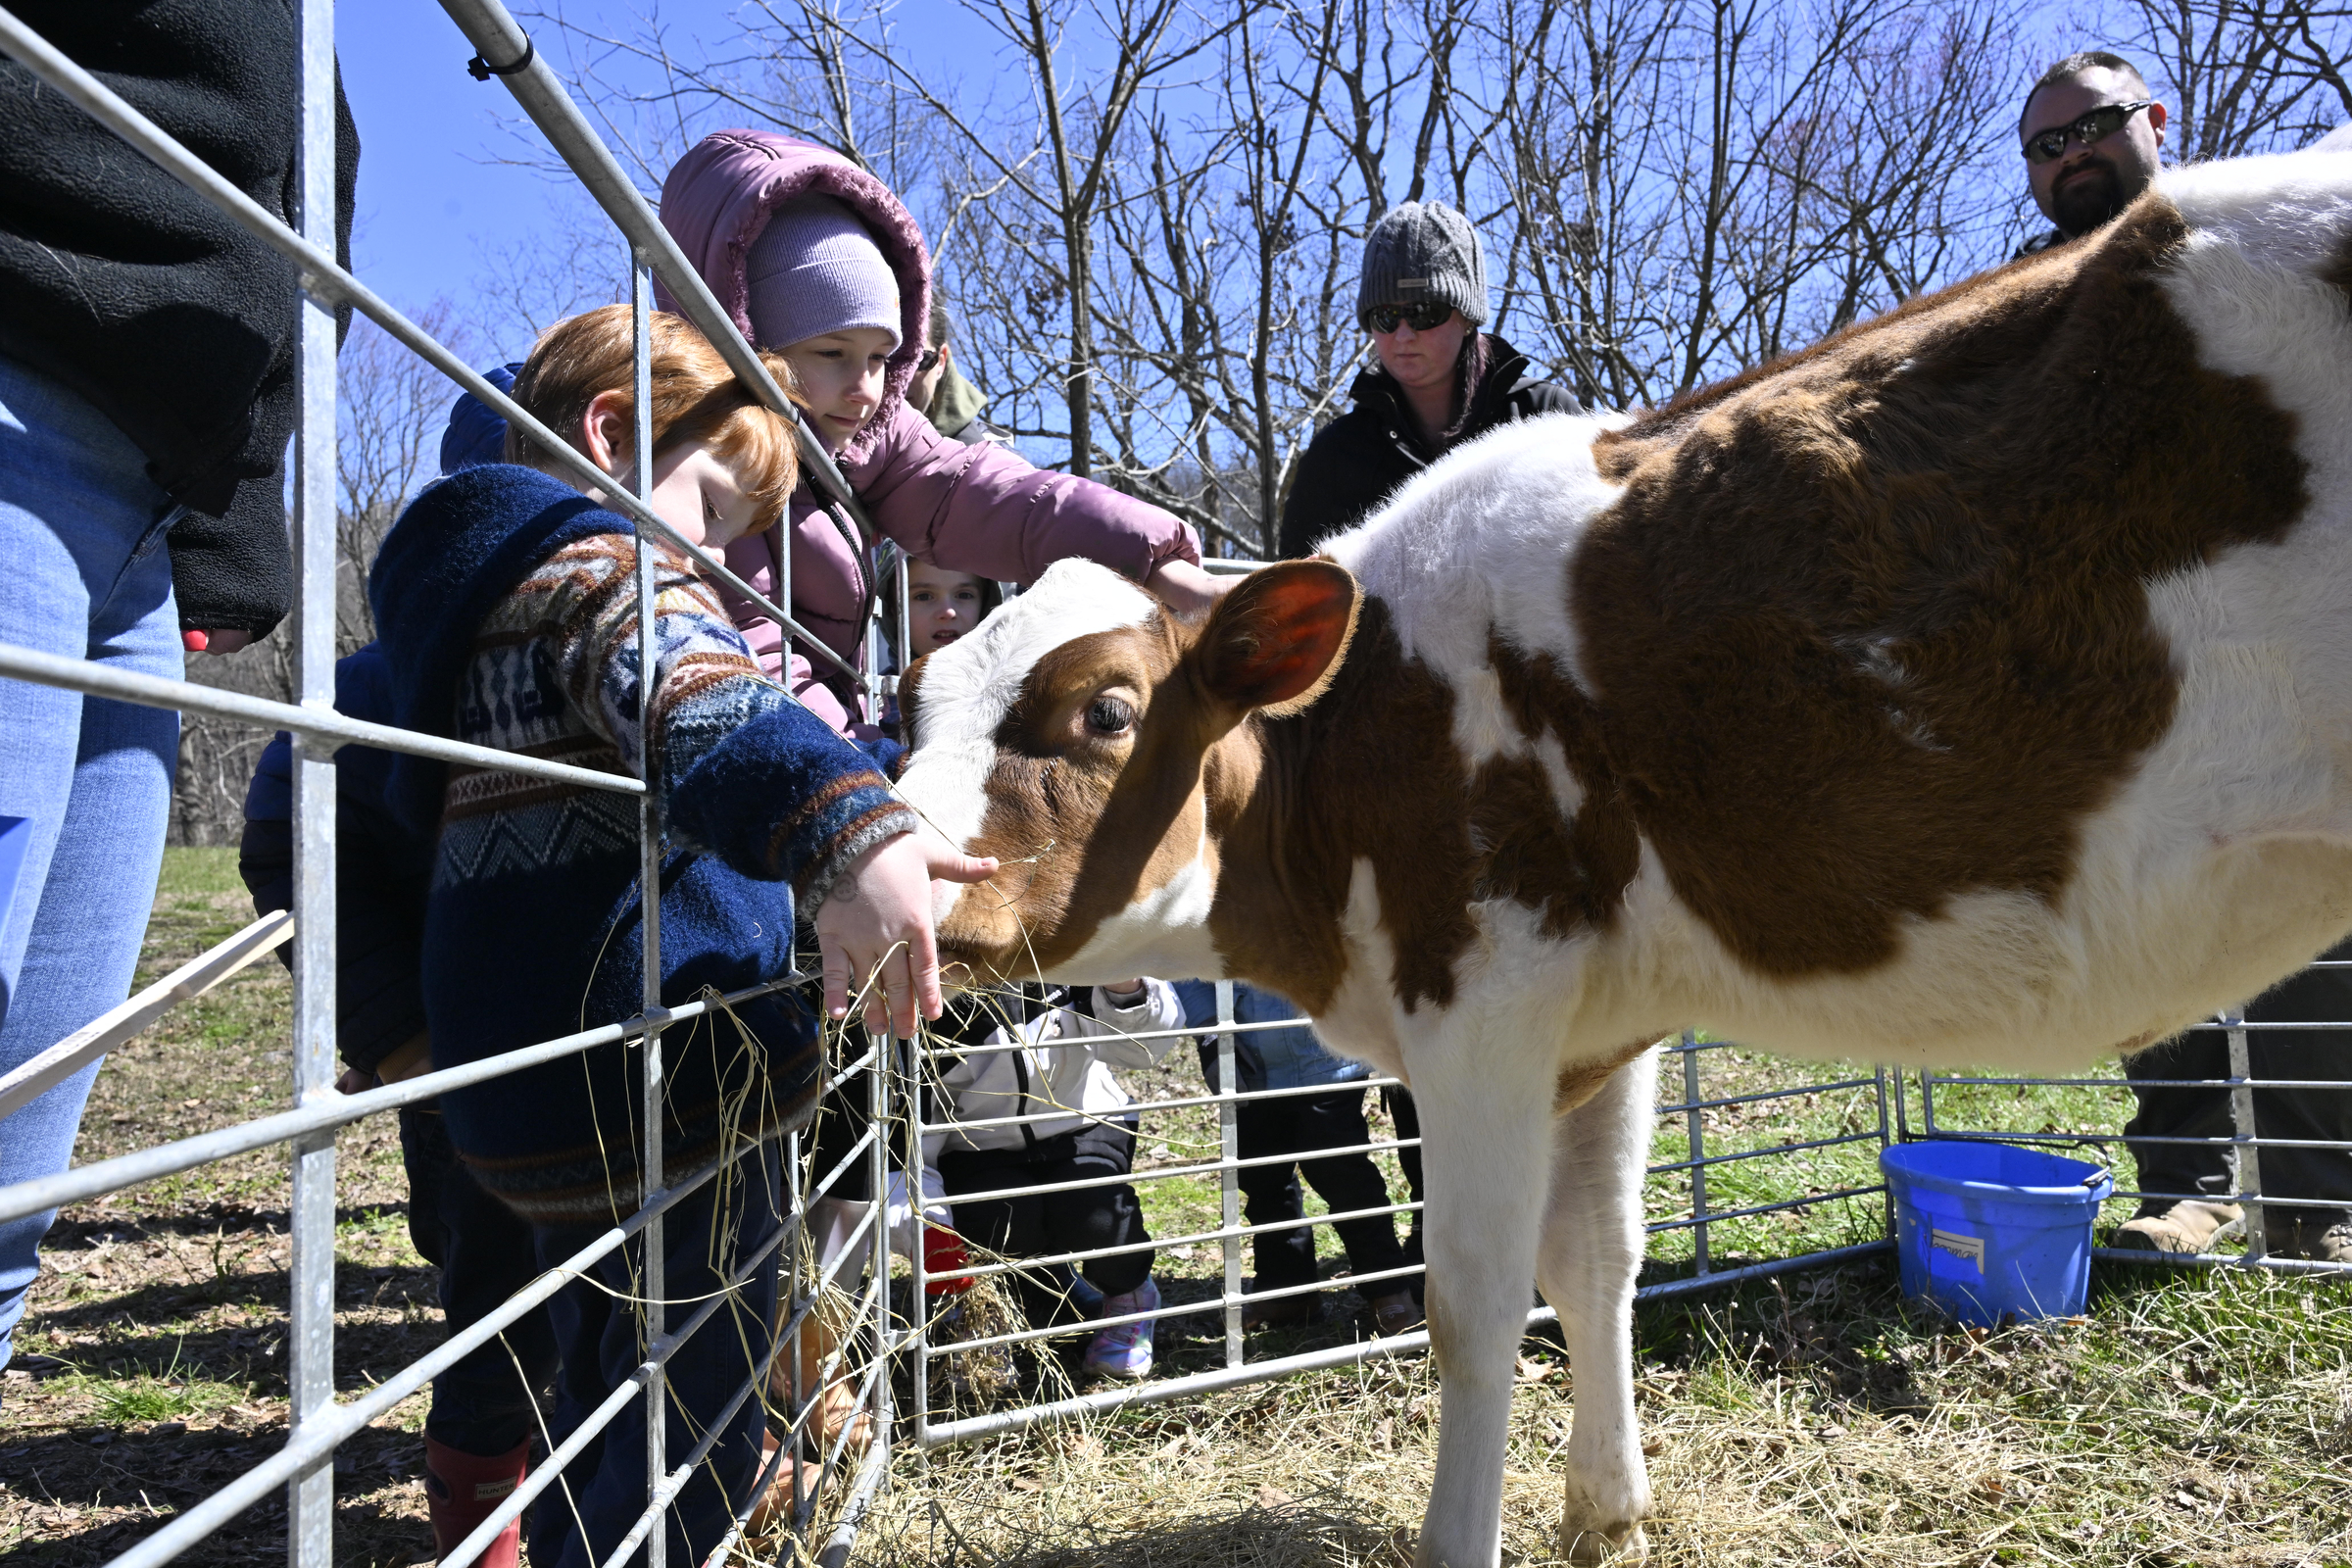 Jameson Buddemeyer, 5, feeds a calf while Grace Boylan,9, pets it on the head during the Coppermine Eggstravaganza at Cascade Park in Hampstead. (Thomas Walker/Freelance)